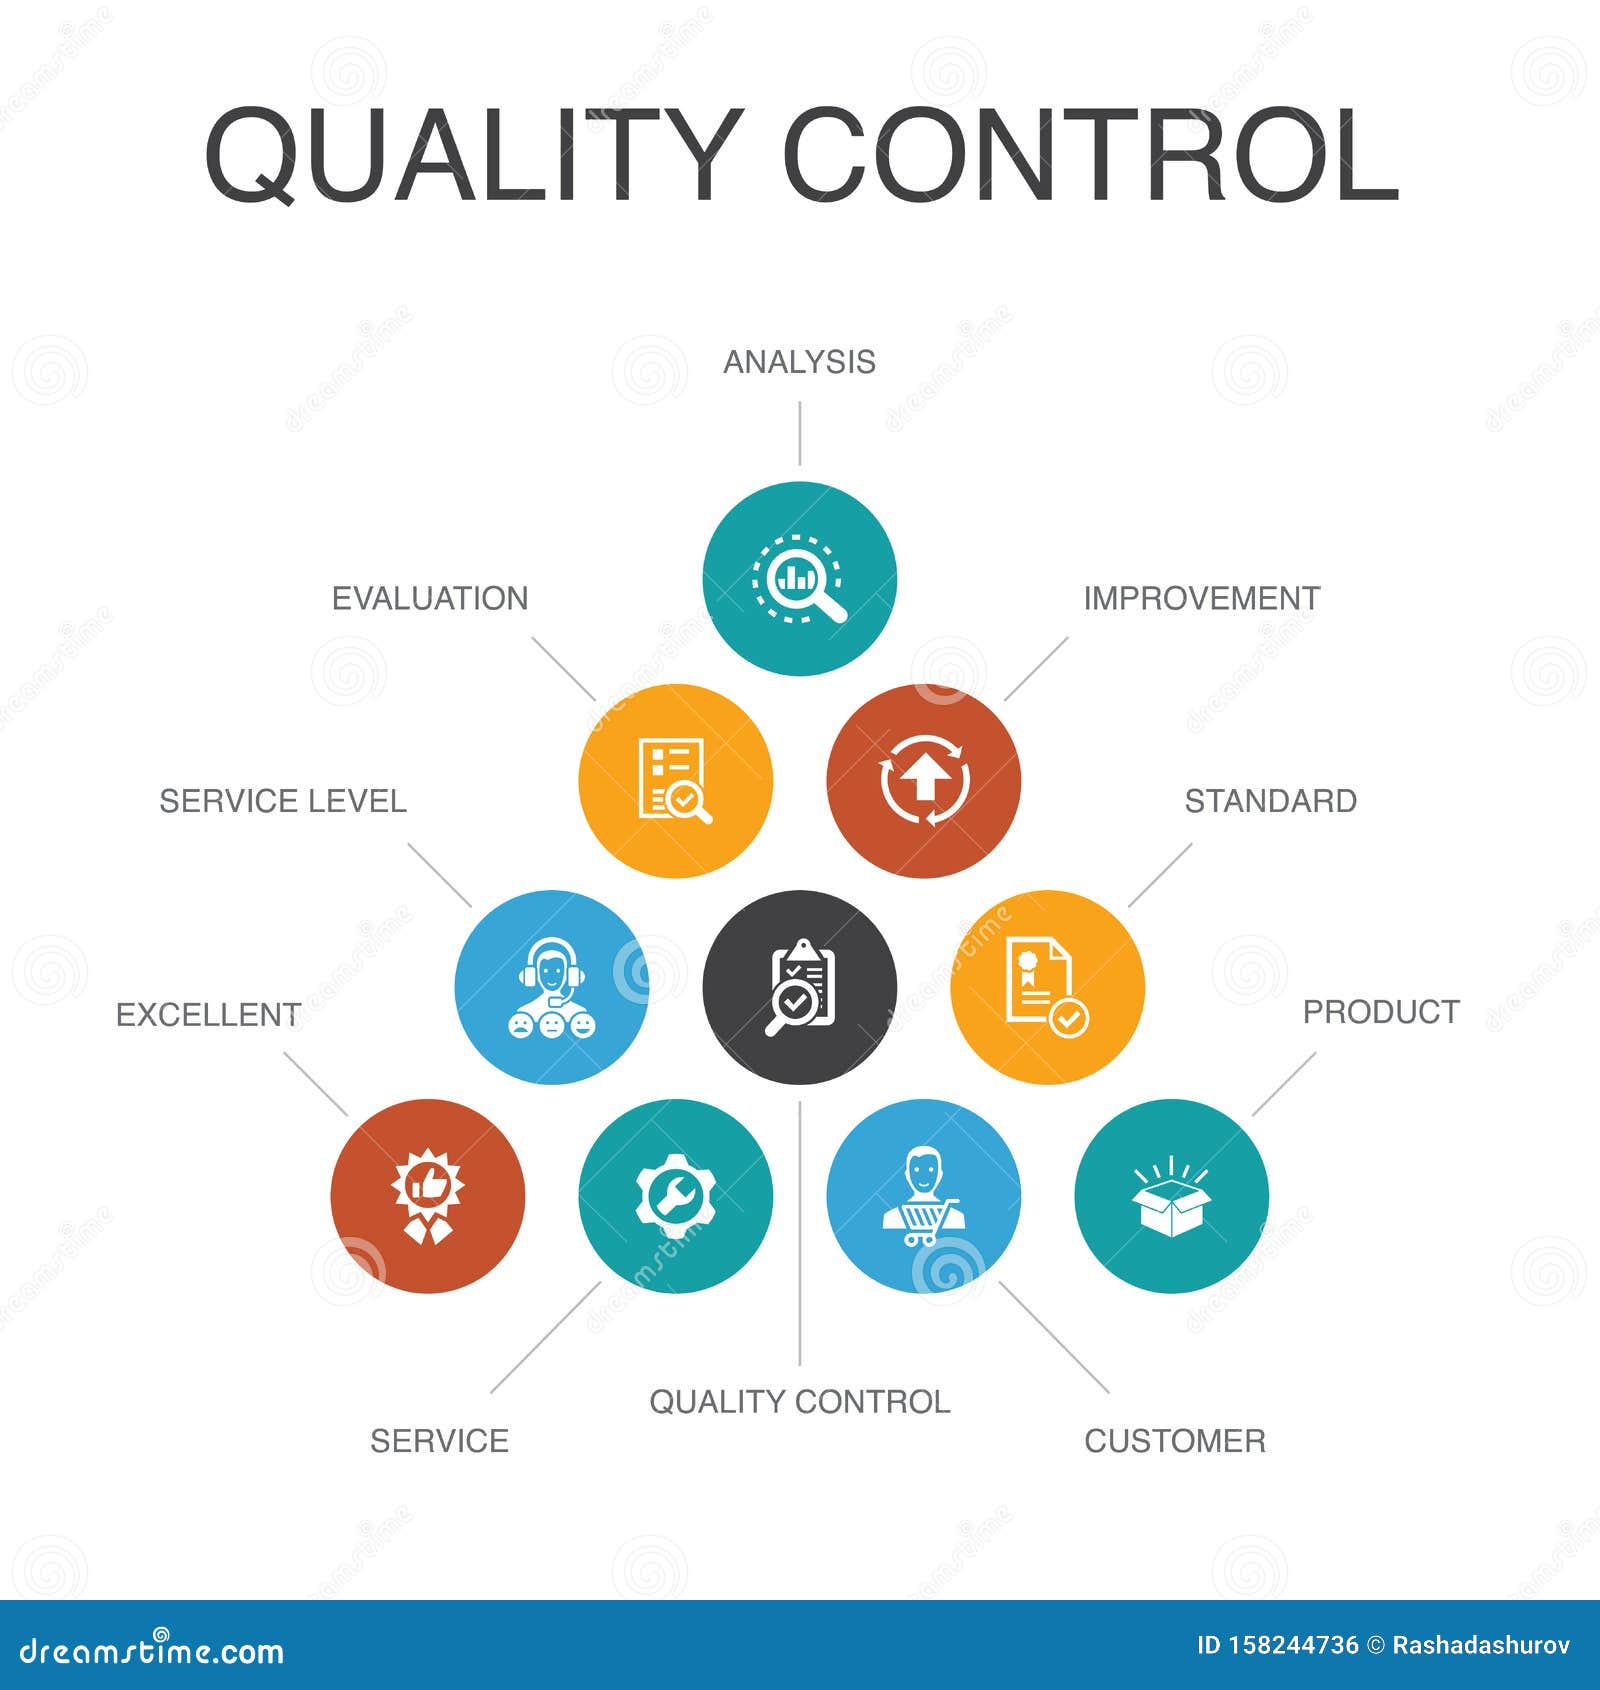 research topics in quality control